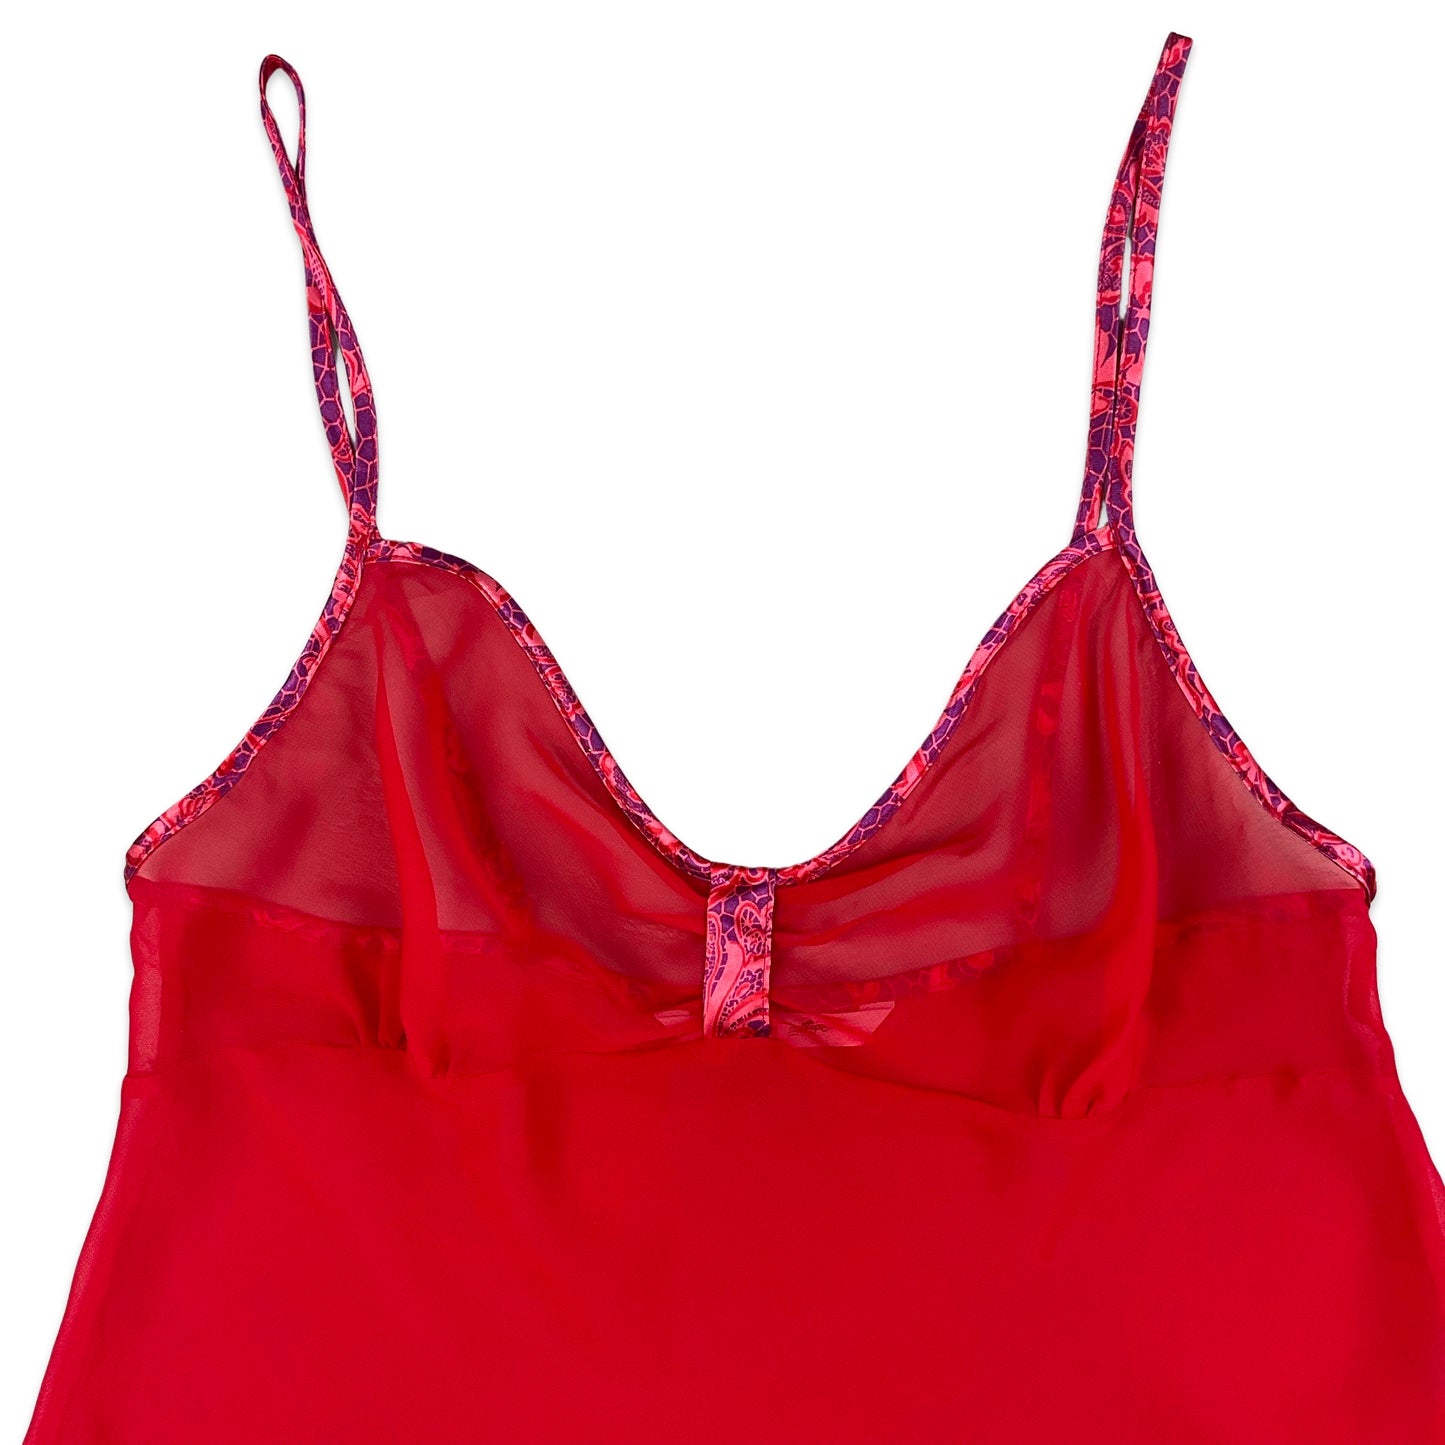 Y2K Red Sheer Spaghetti Strap Loose Fit Top 6 8 10